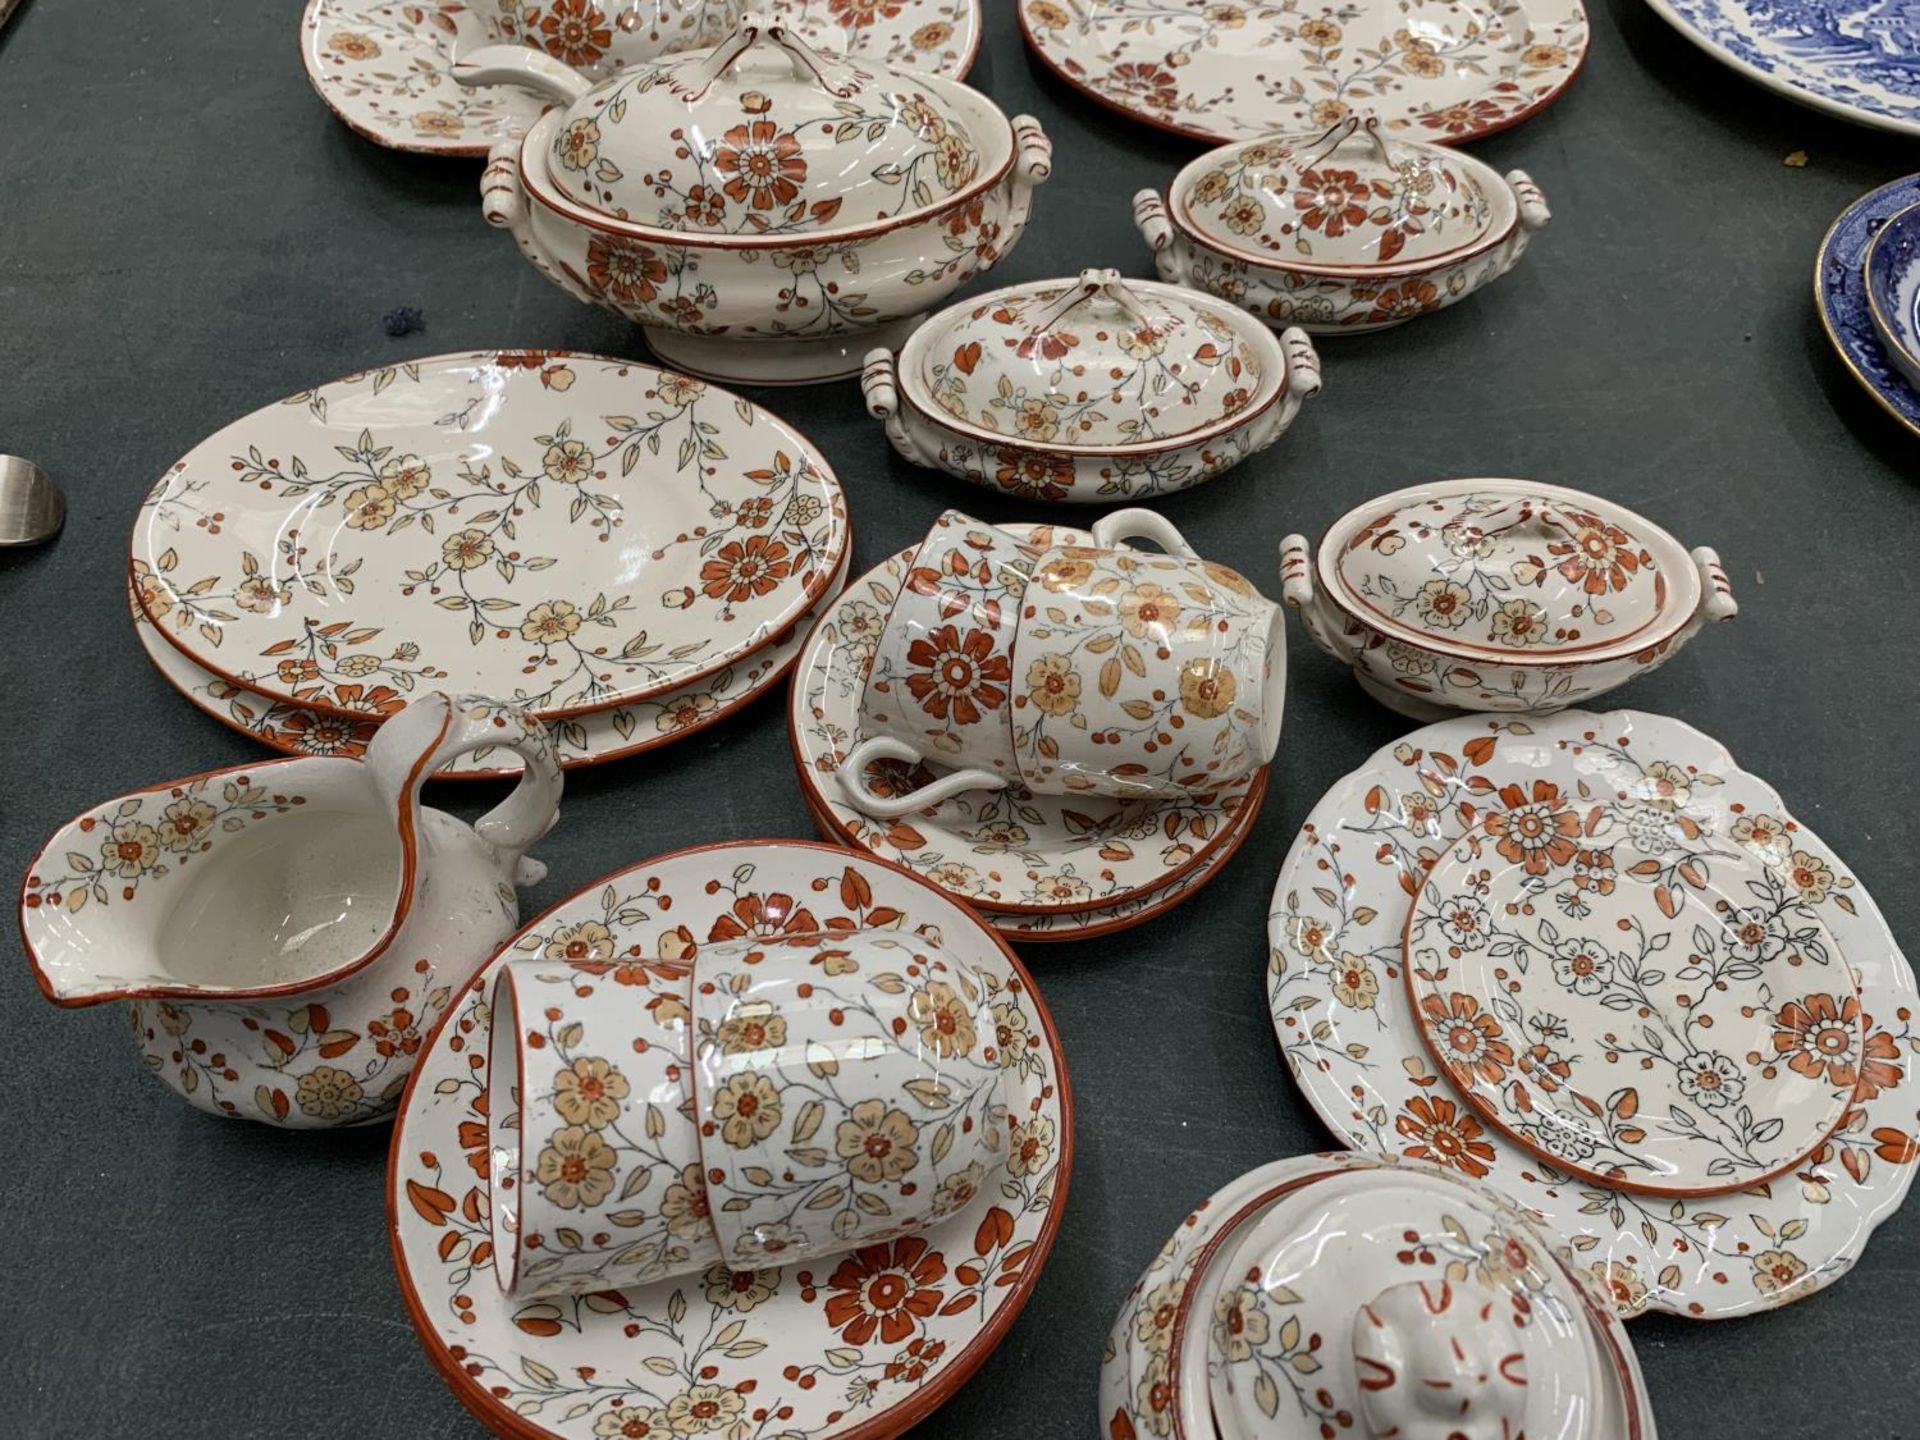 A MINIATURE RIDGWAY'S, STOKE-ON-TRENT, CHILD'S TEA SET 'PERSIA' PATTERN, CIRCA 1880, TO INCLUDE A - Image 3 of 5